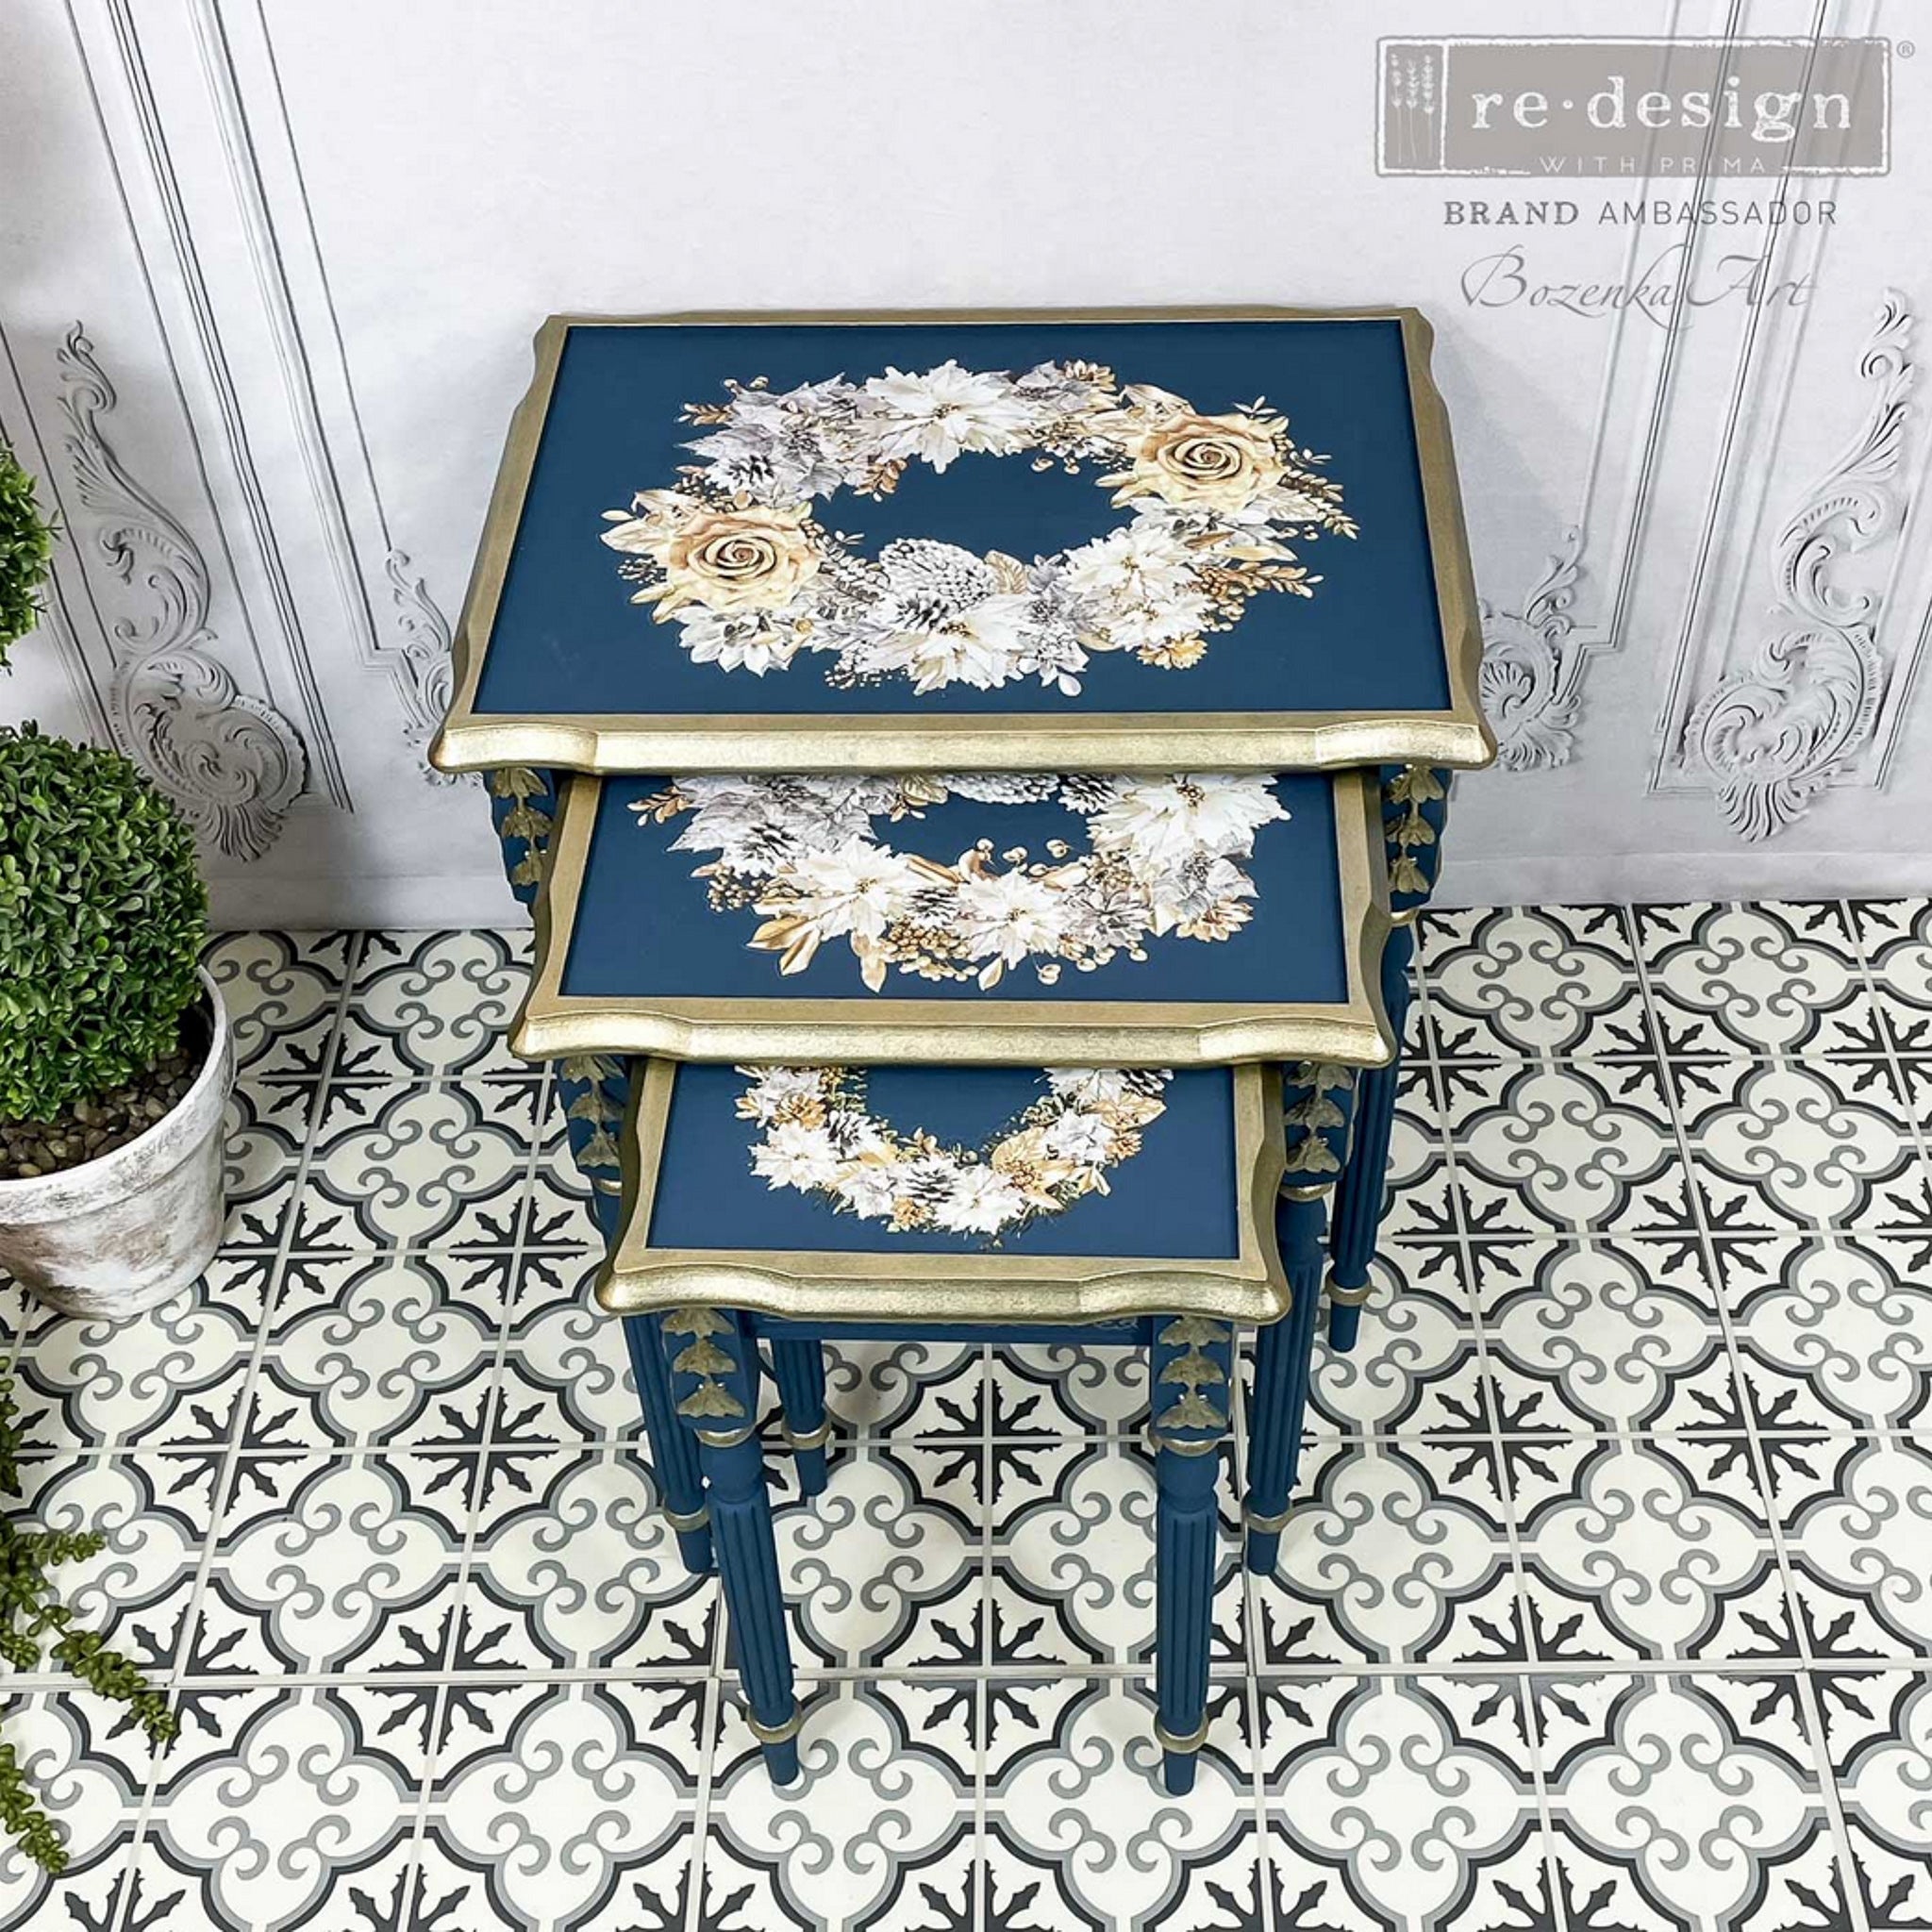 Three nesting side tables refurbished by Bozenka Art, a ReDesign with Prima Brand Ambassador, are painted blue with gold trim and feature the A Gilded Moment small transfer on the tops of them.